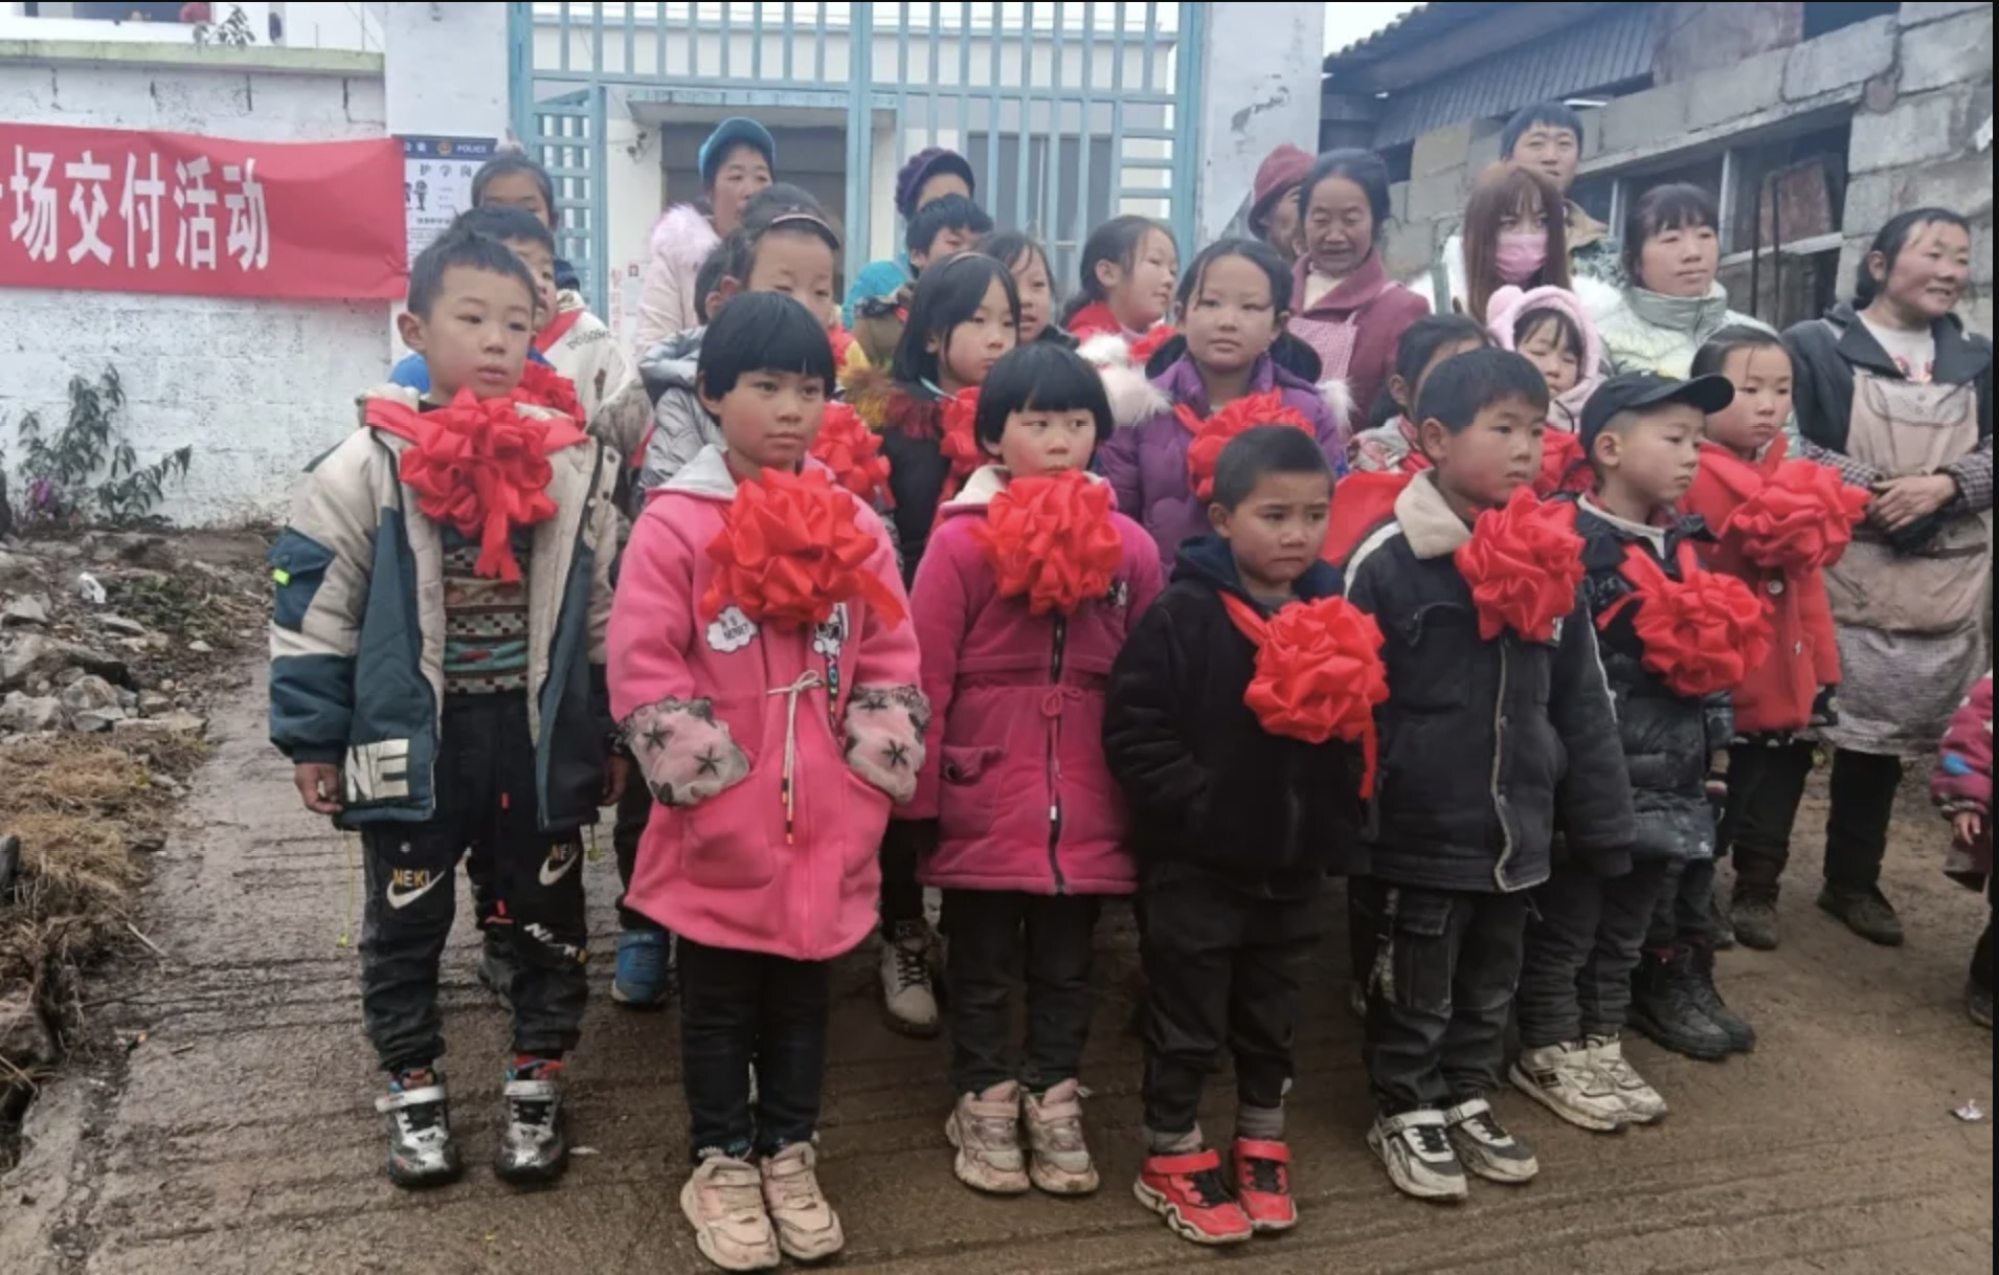 Children at the award ceremony where they received a piglet. Photo: Weixin